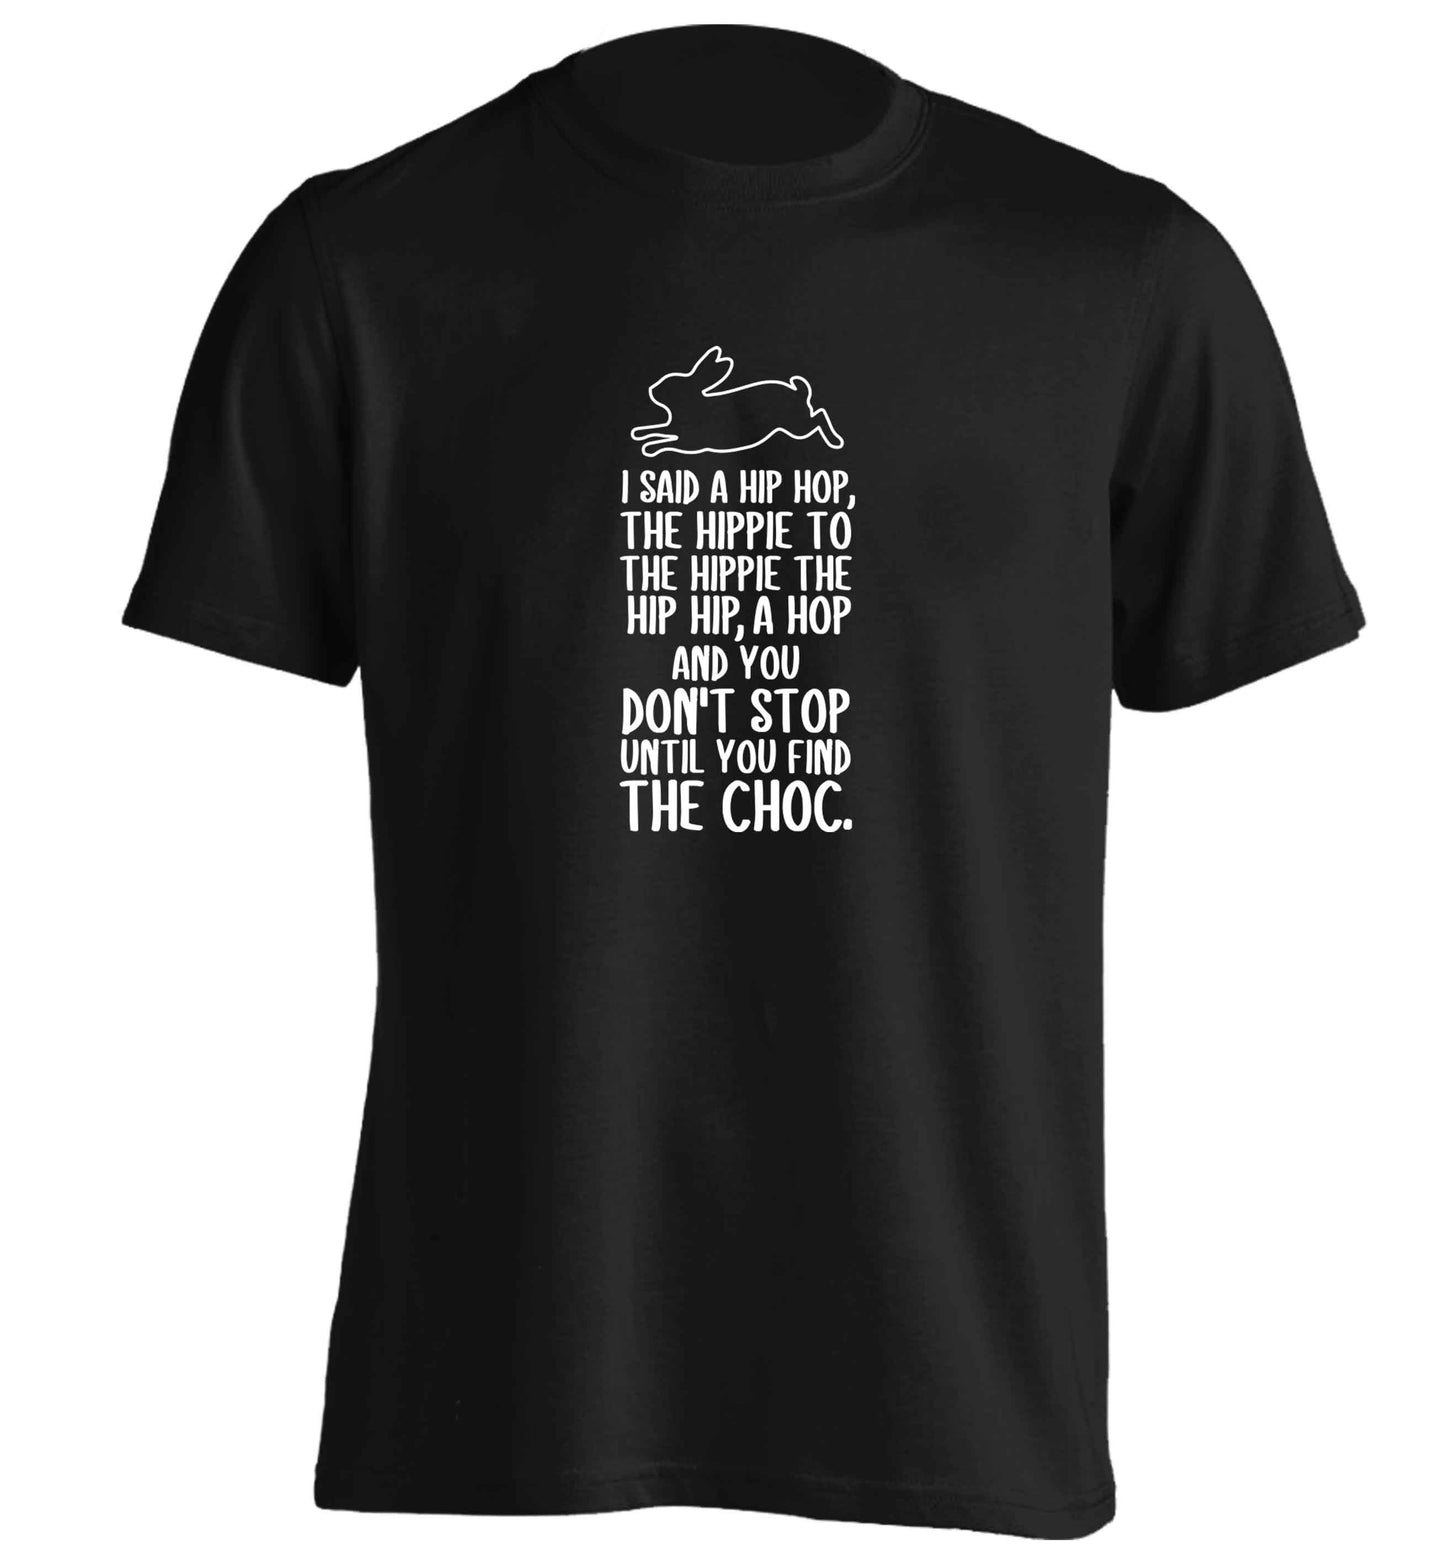 Don't stop until you find the choc adults unisex black Tshirt 2XL